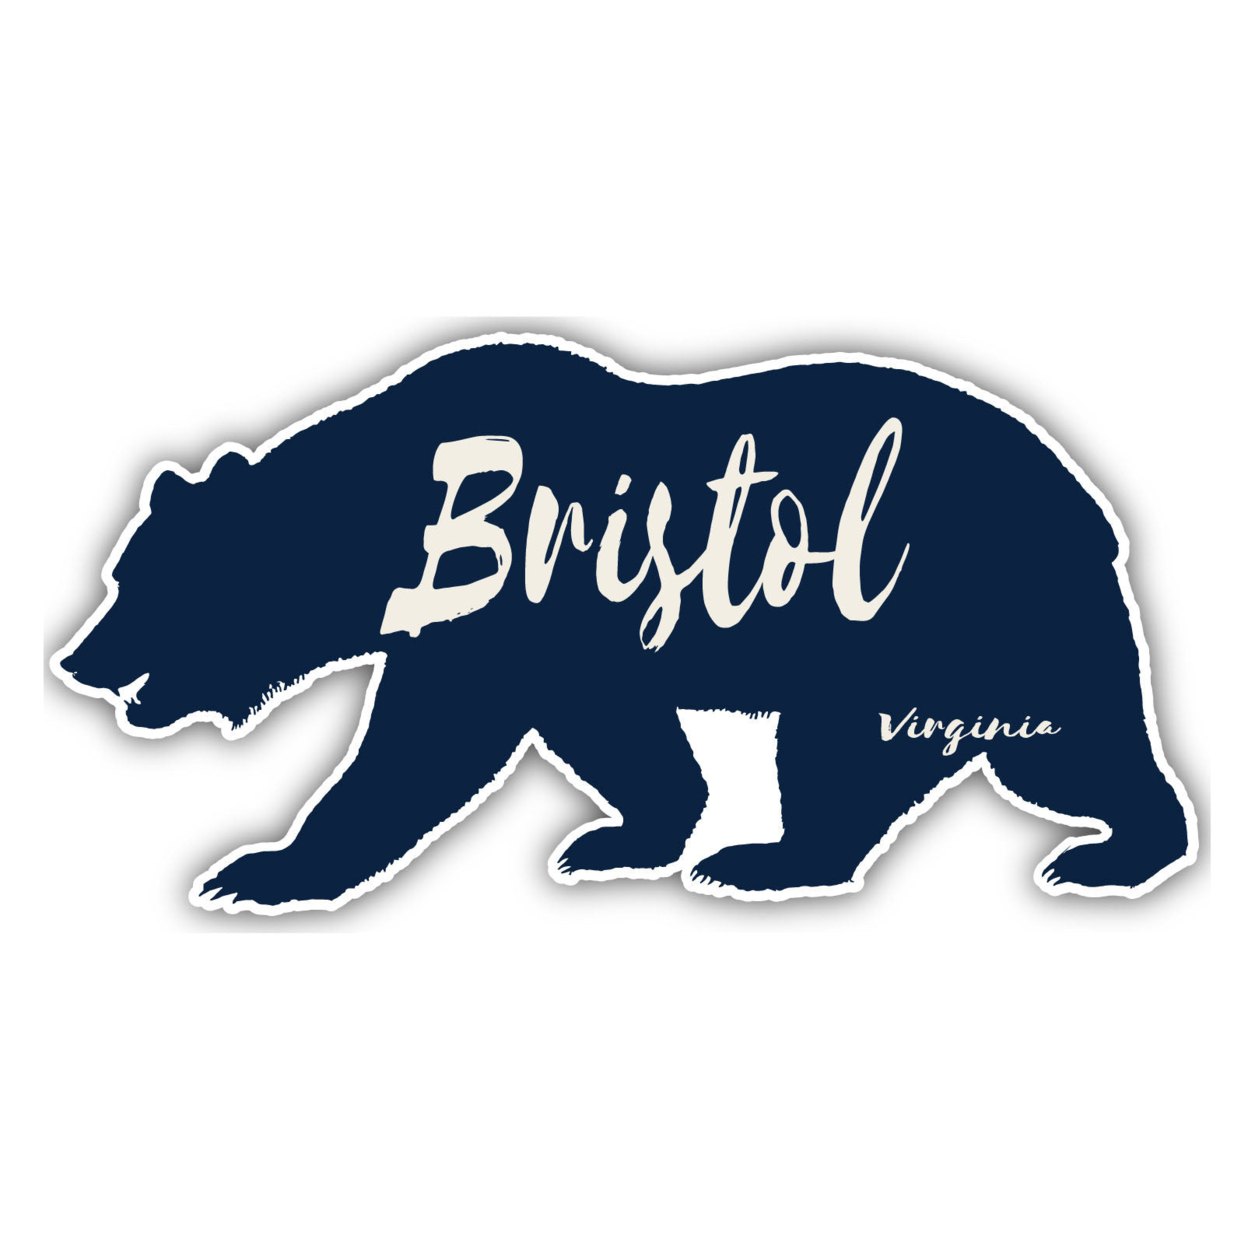 Bristol Virginia Souvenir Decorative Stickers (Choose Theme And Size) - 4-Pack, 2-Inch, Great Outdoors